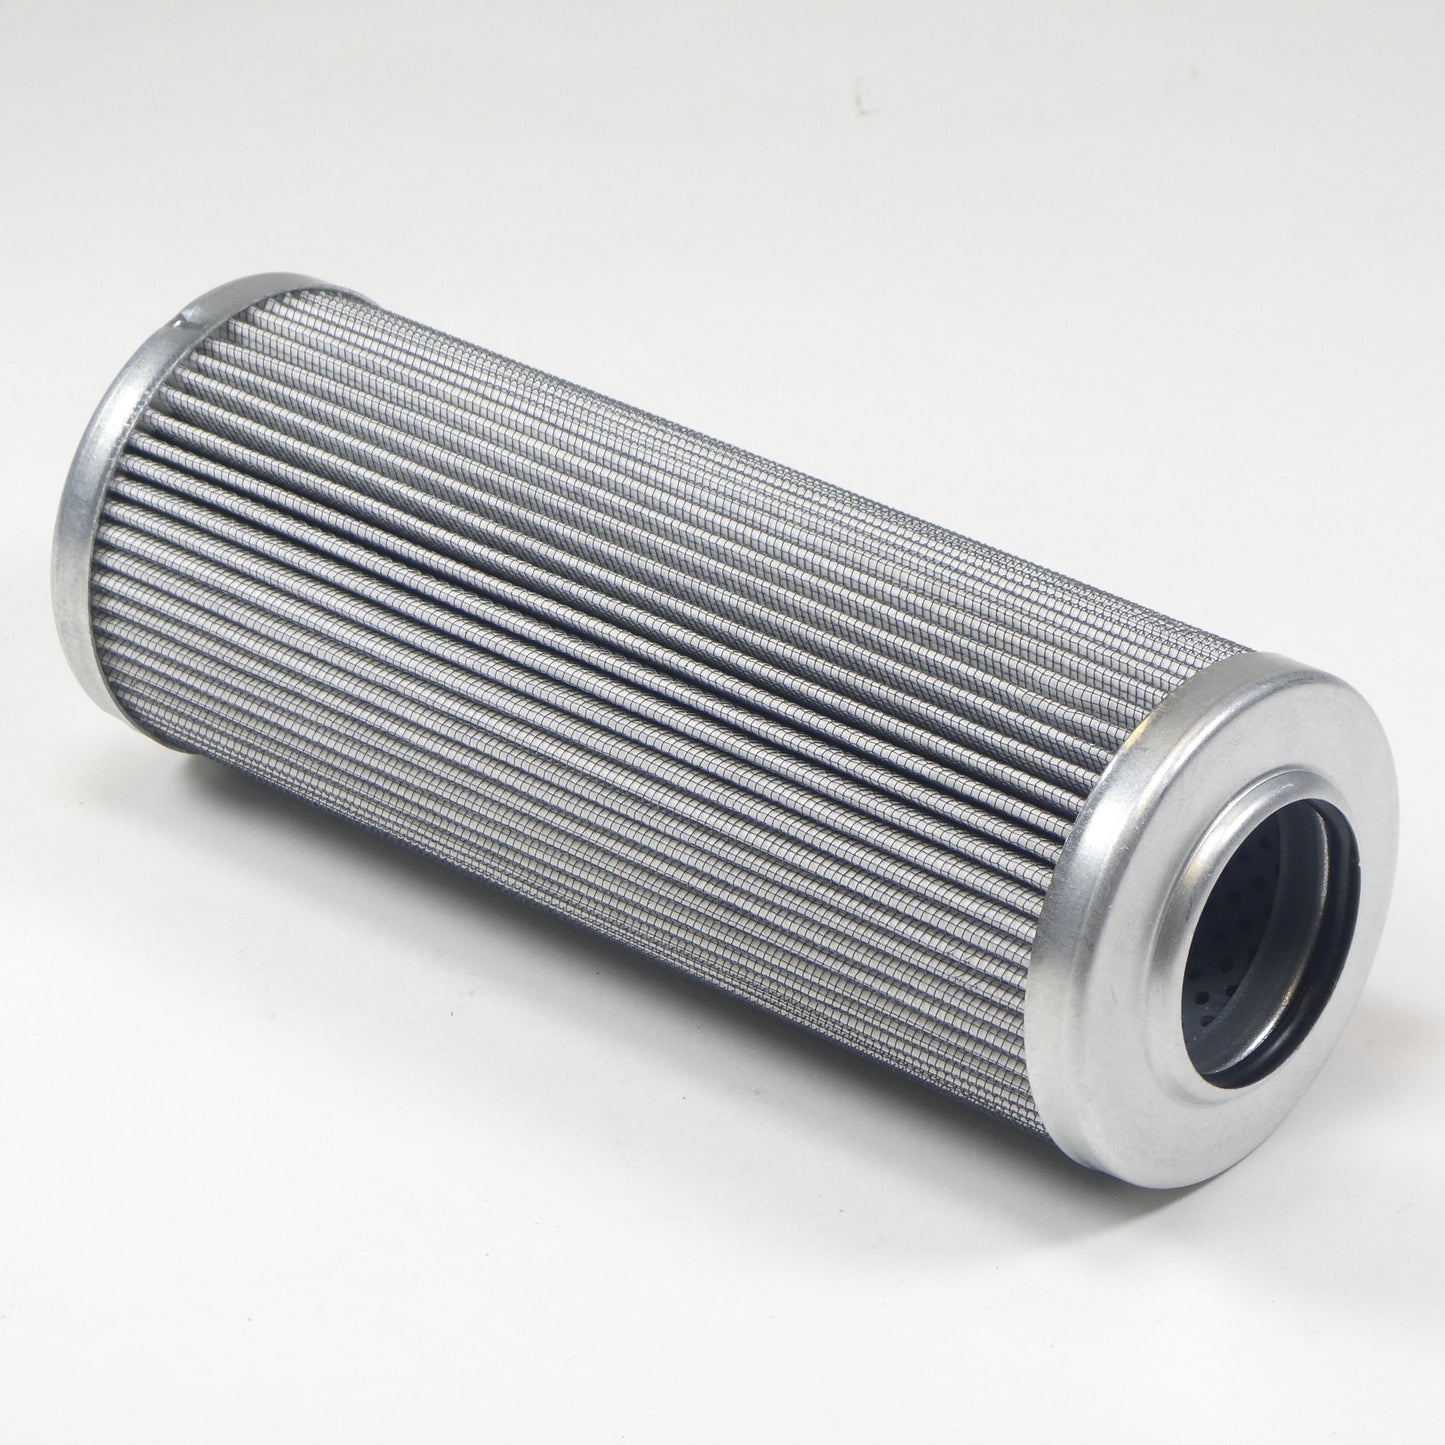 Hydrafil Replacement Filter Element for Porous Media HE9604LL13B